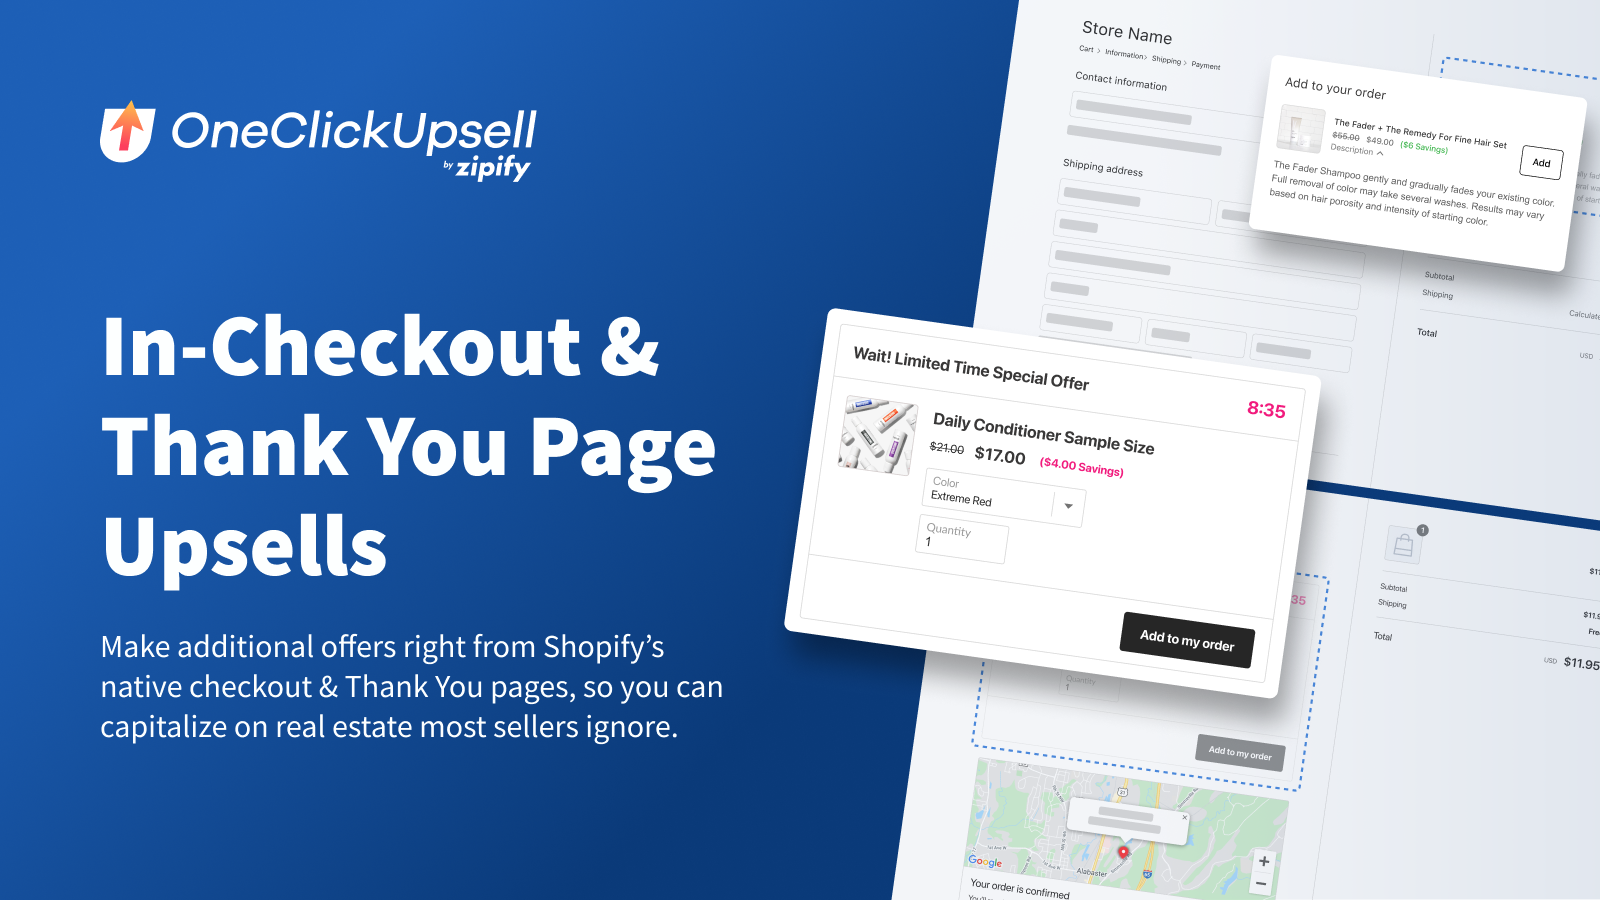 In-Checkout & Thank You Page Upsells